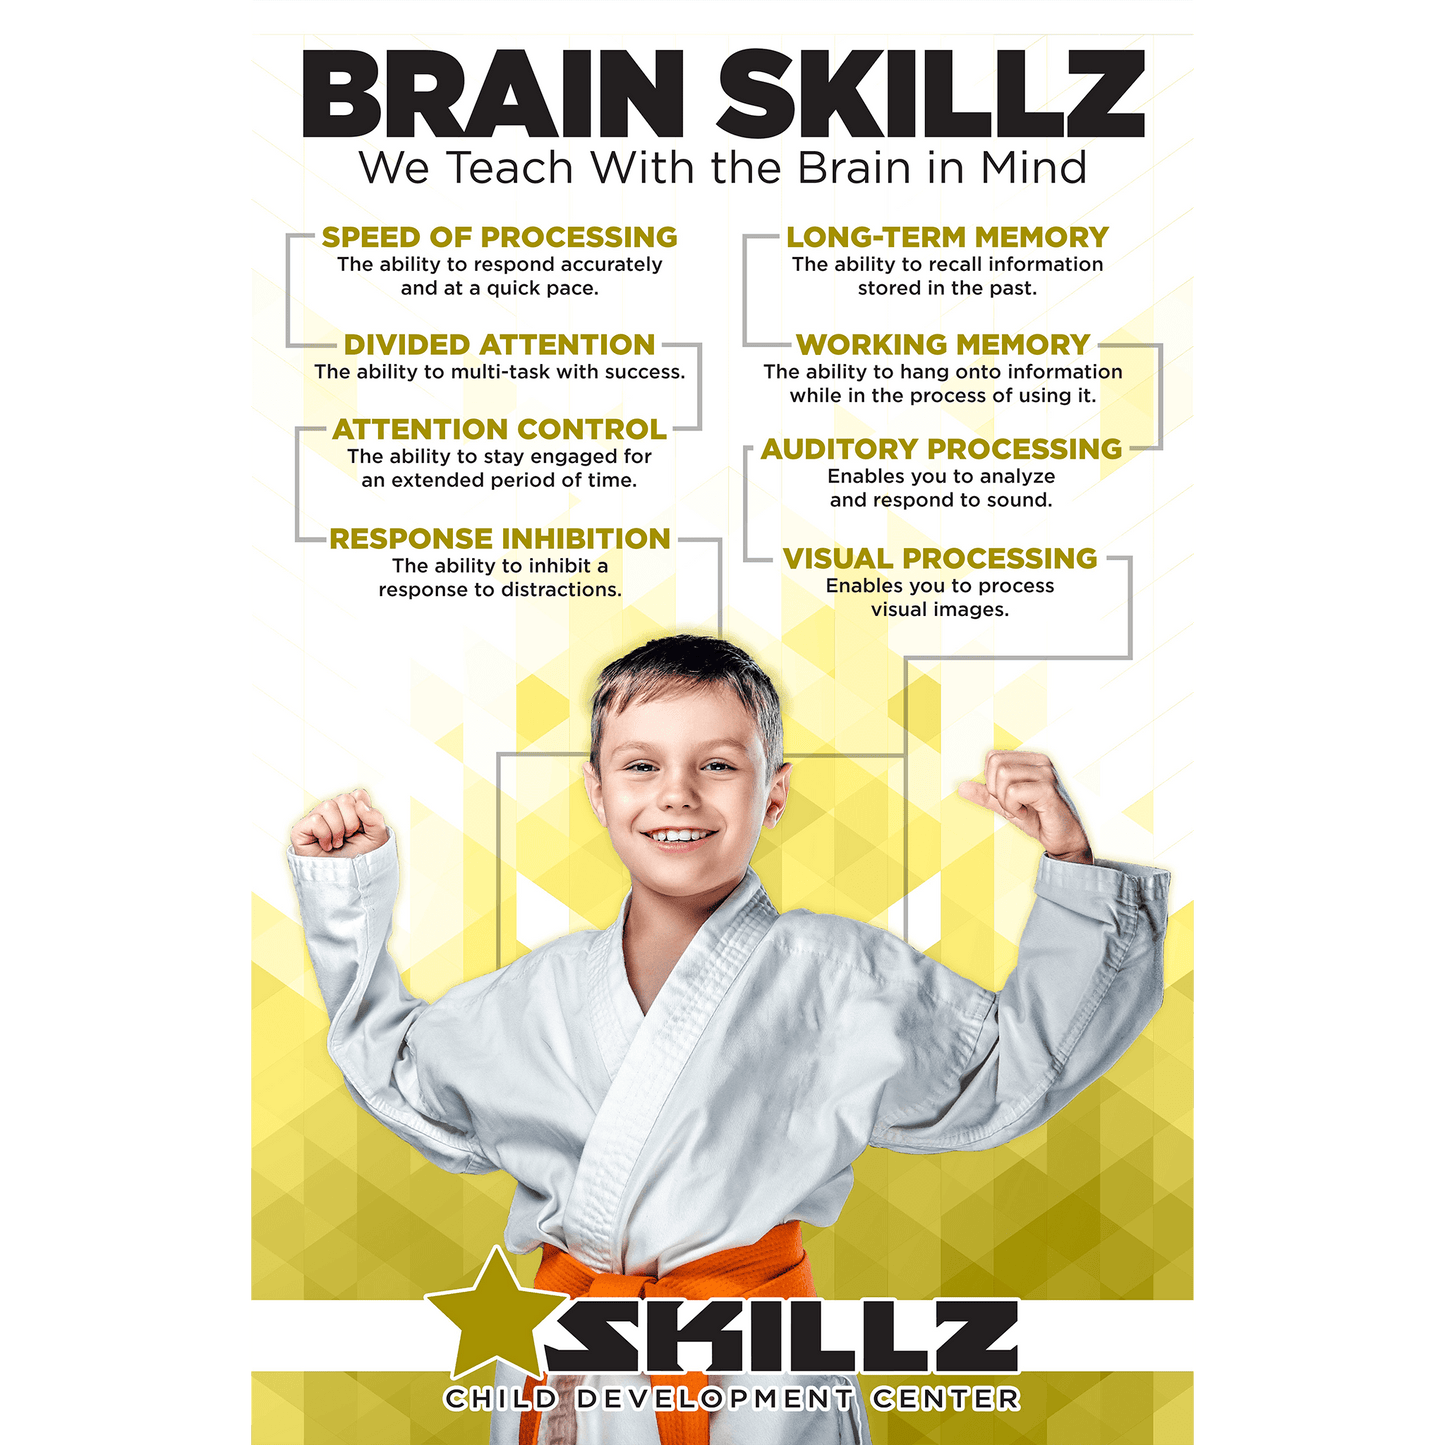 Brain, Talent and Teaching 3 Pack - Foamcore